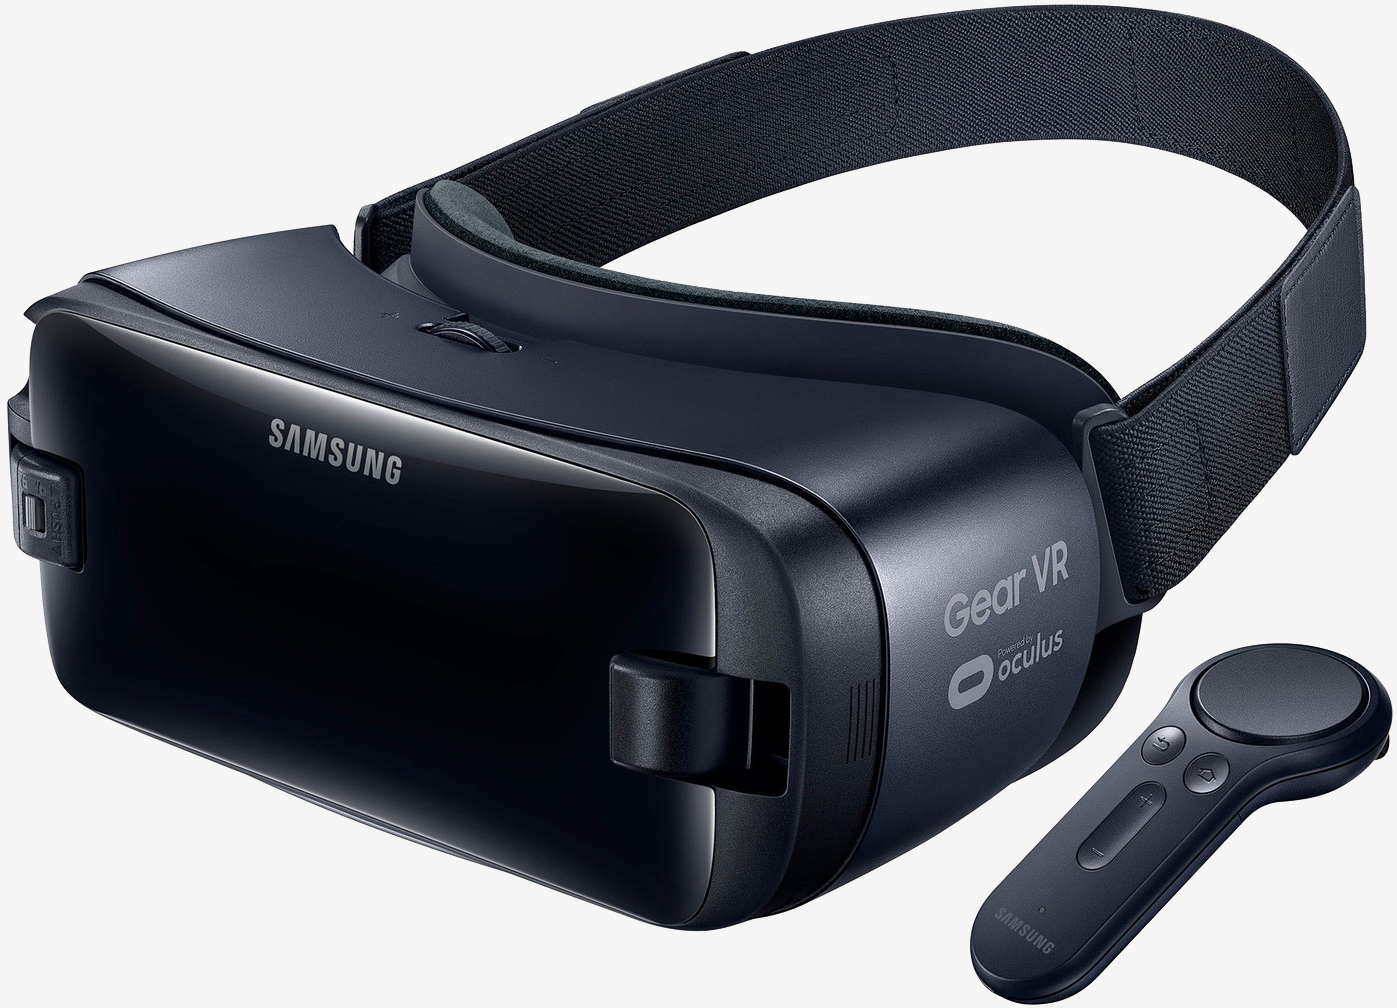 Samsung's latest Gear VR headset includes a wireless motion controller